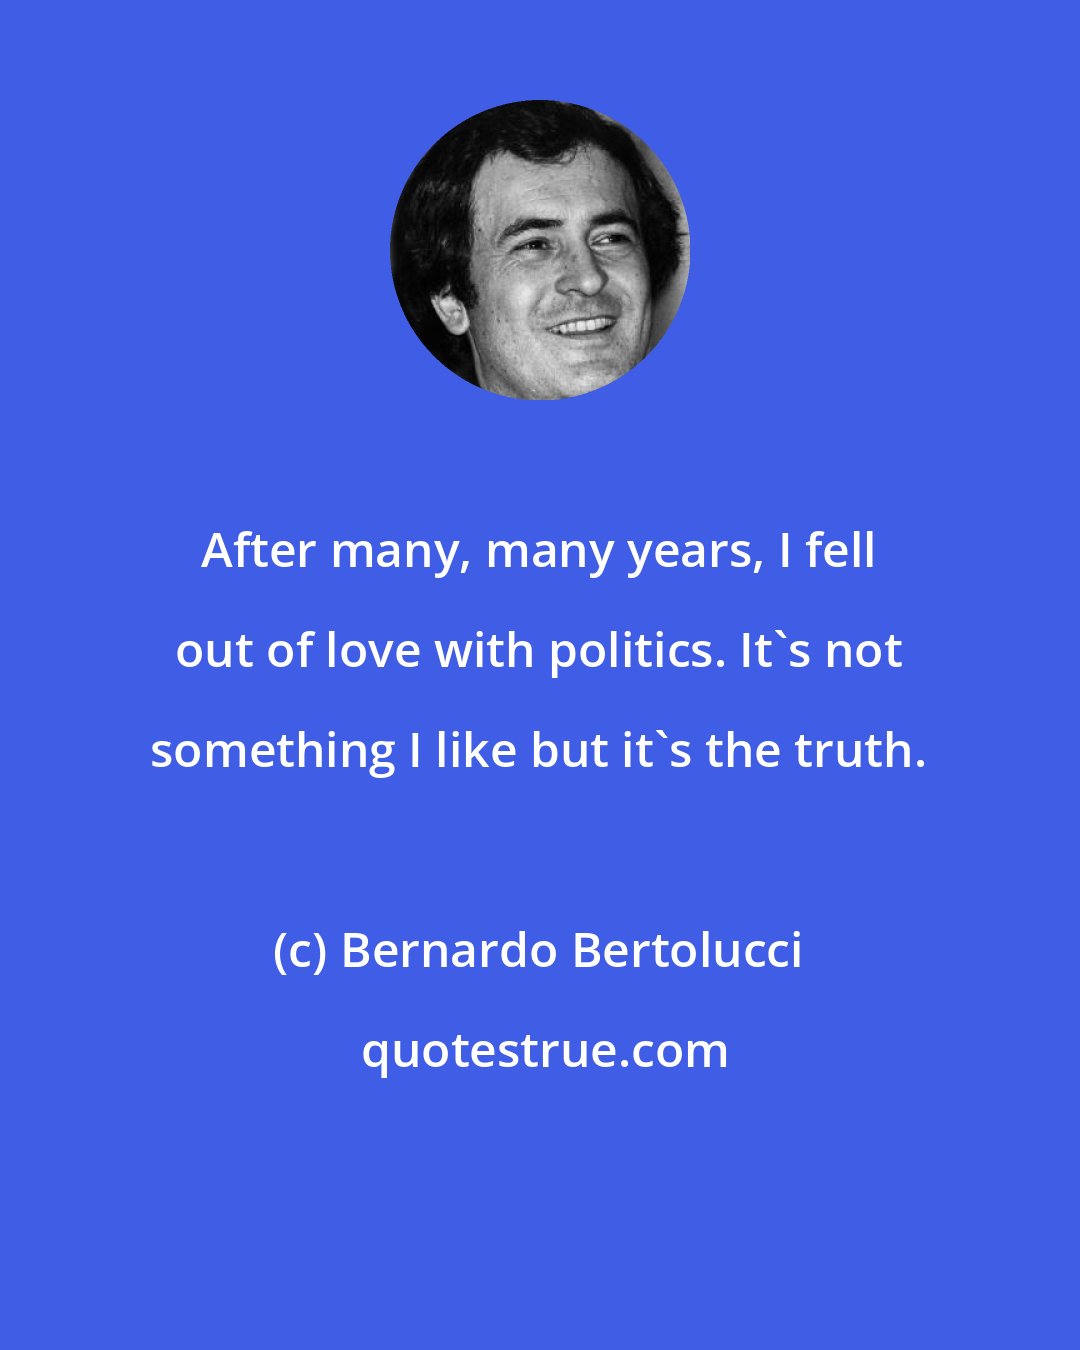 Bernardo Bertolucci: After many, many years, I fell out of love with politics. It's not something I like but it's the truth.